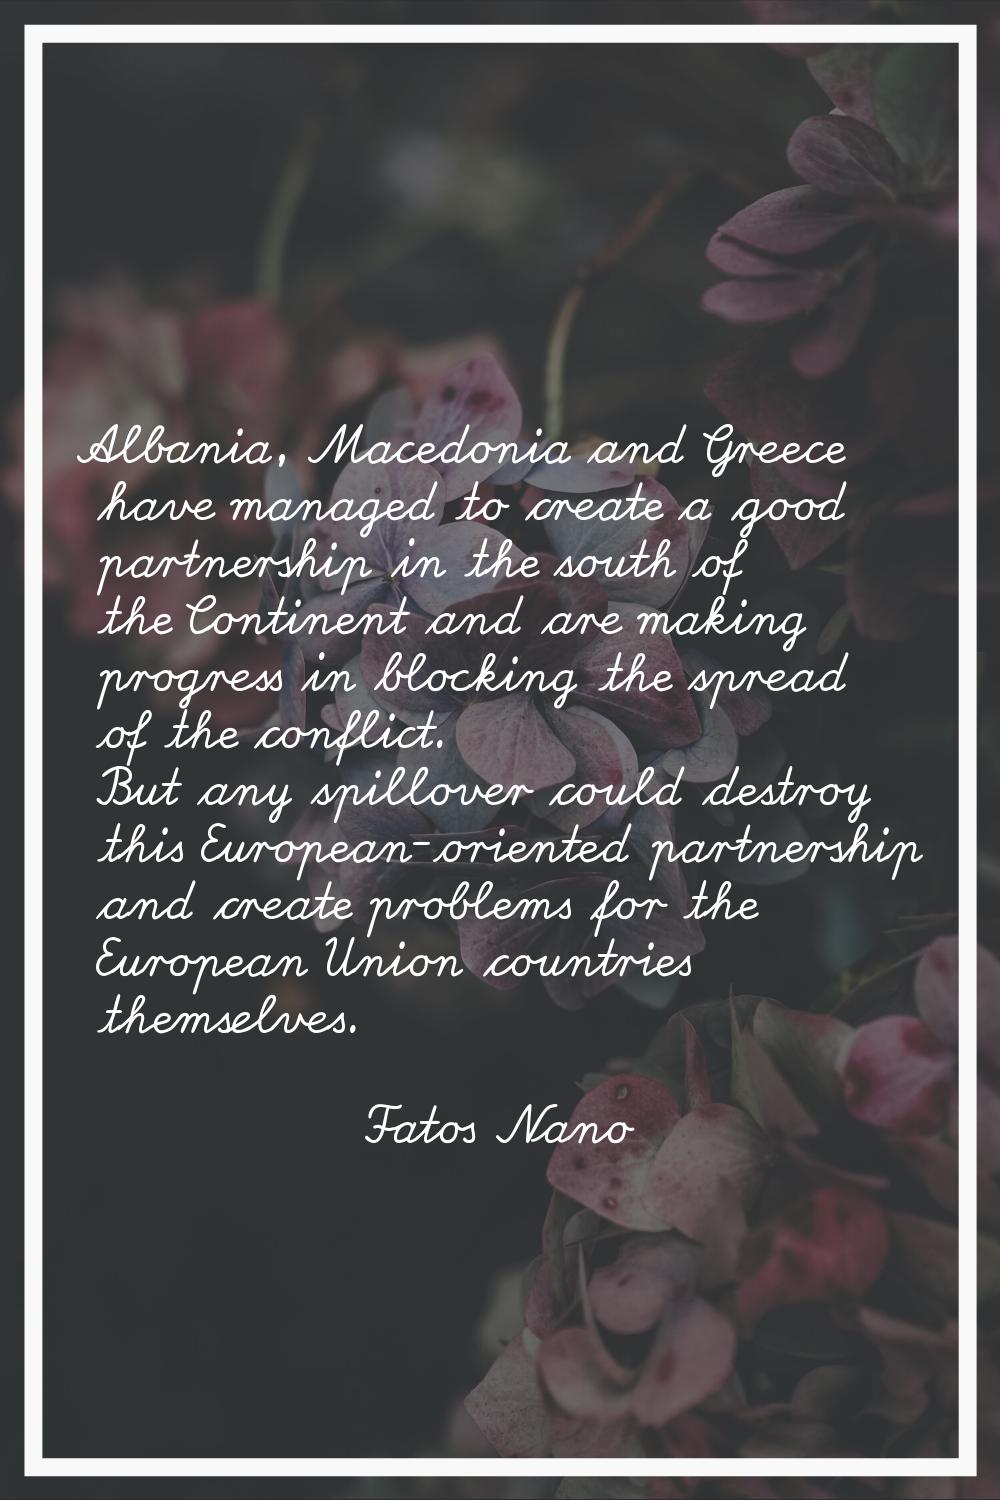 Albania, Macedonia and Greece have managed to create a good partnership in the south of the Contine